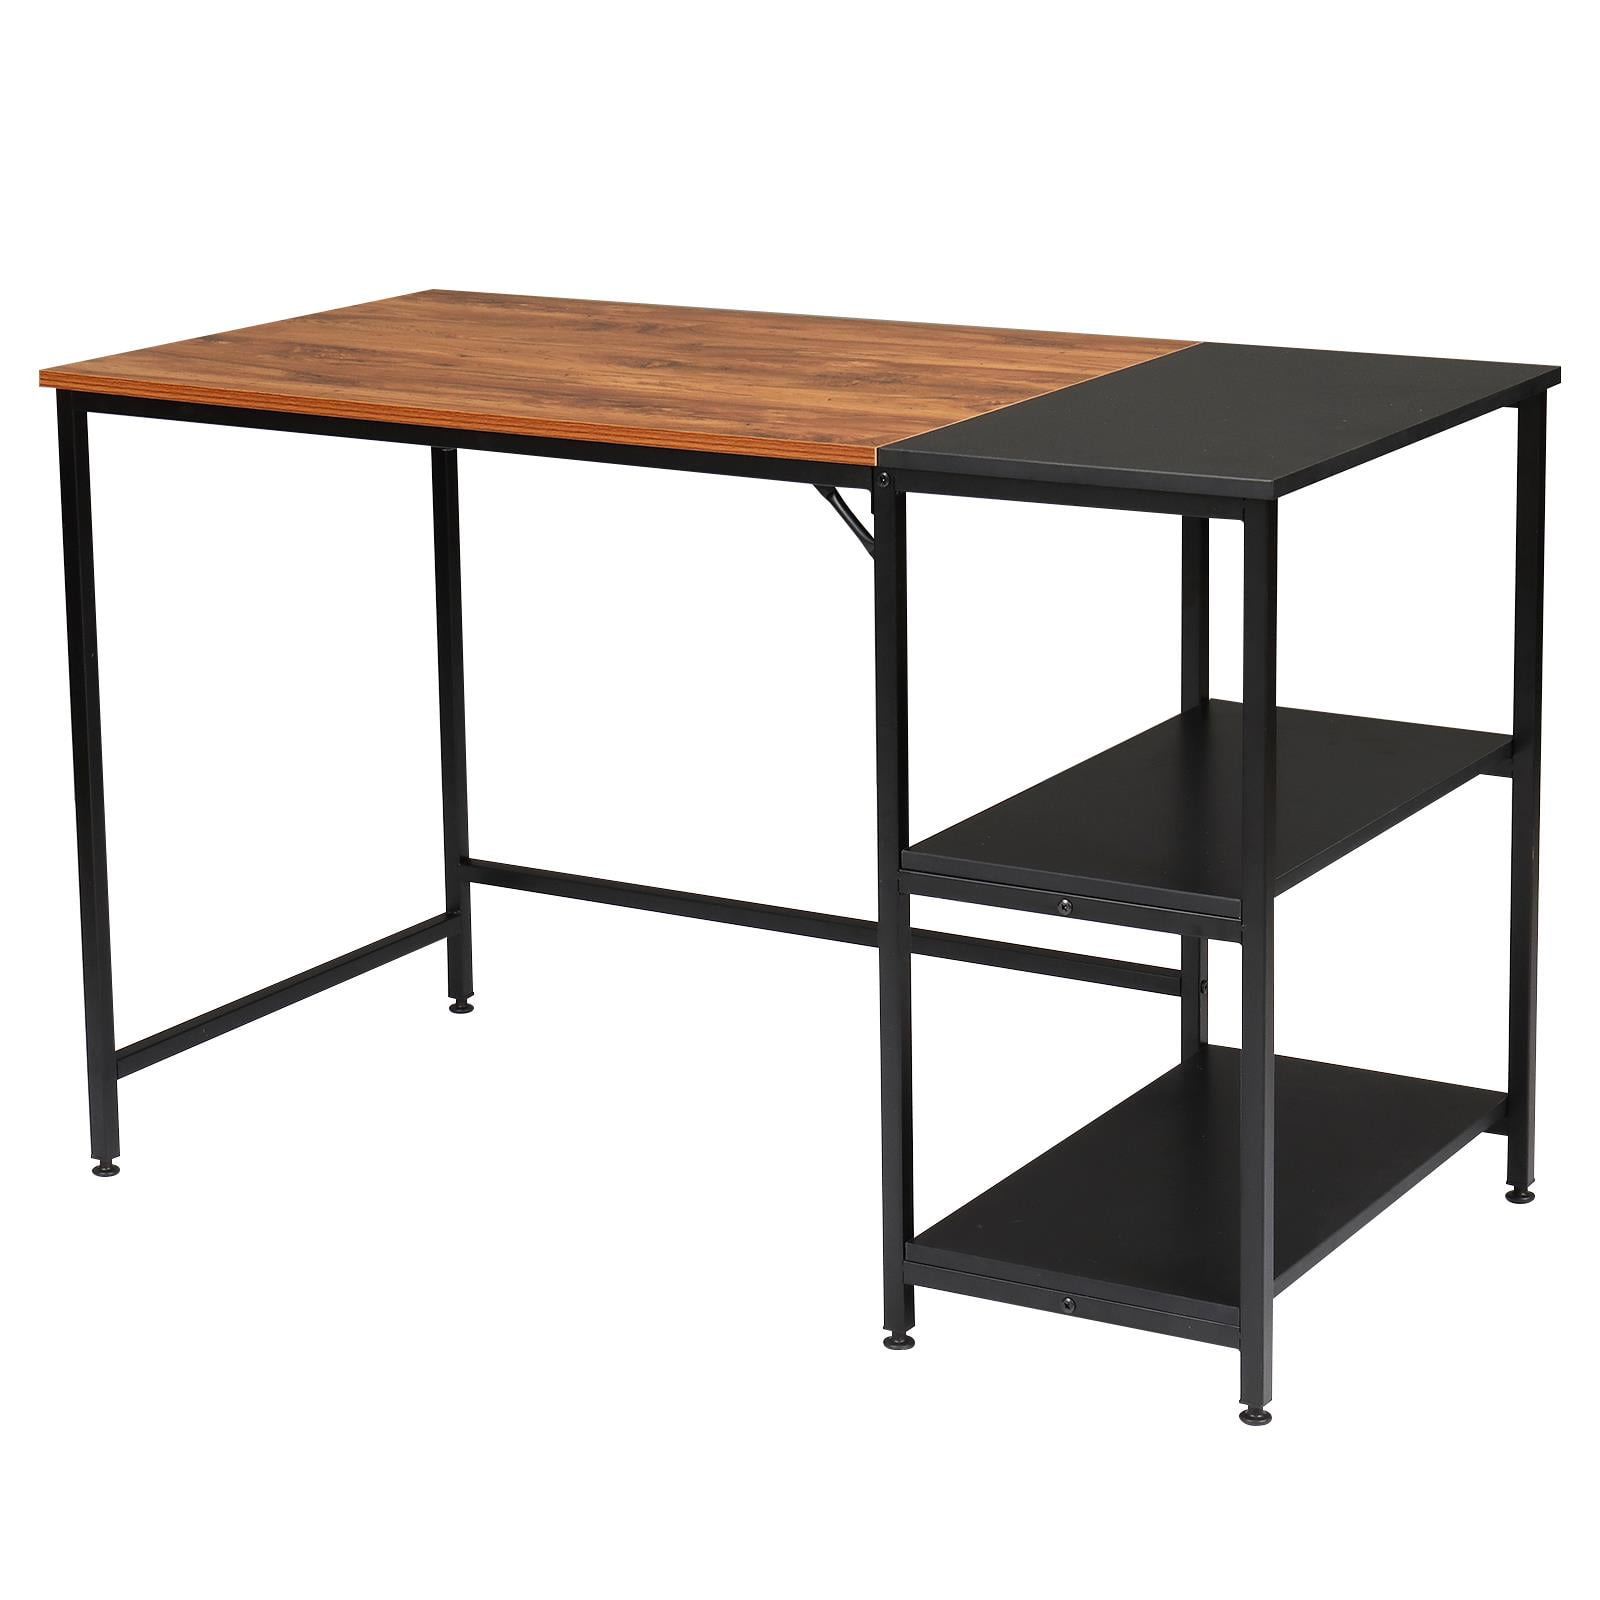  Vikiullf Writing Desk with Storage Cabinet - 47.2” Black Modern  Wood Home Office Computer Desk with 2 File Drawers & Open Shelf Study Table  for Teens : Everything Else